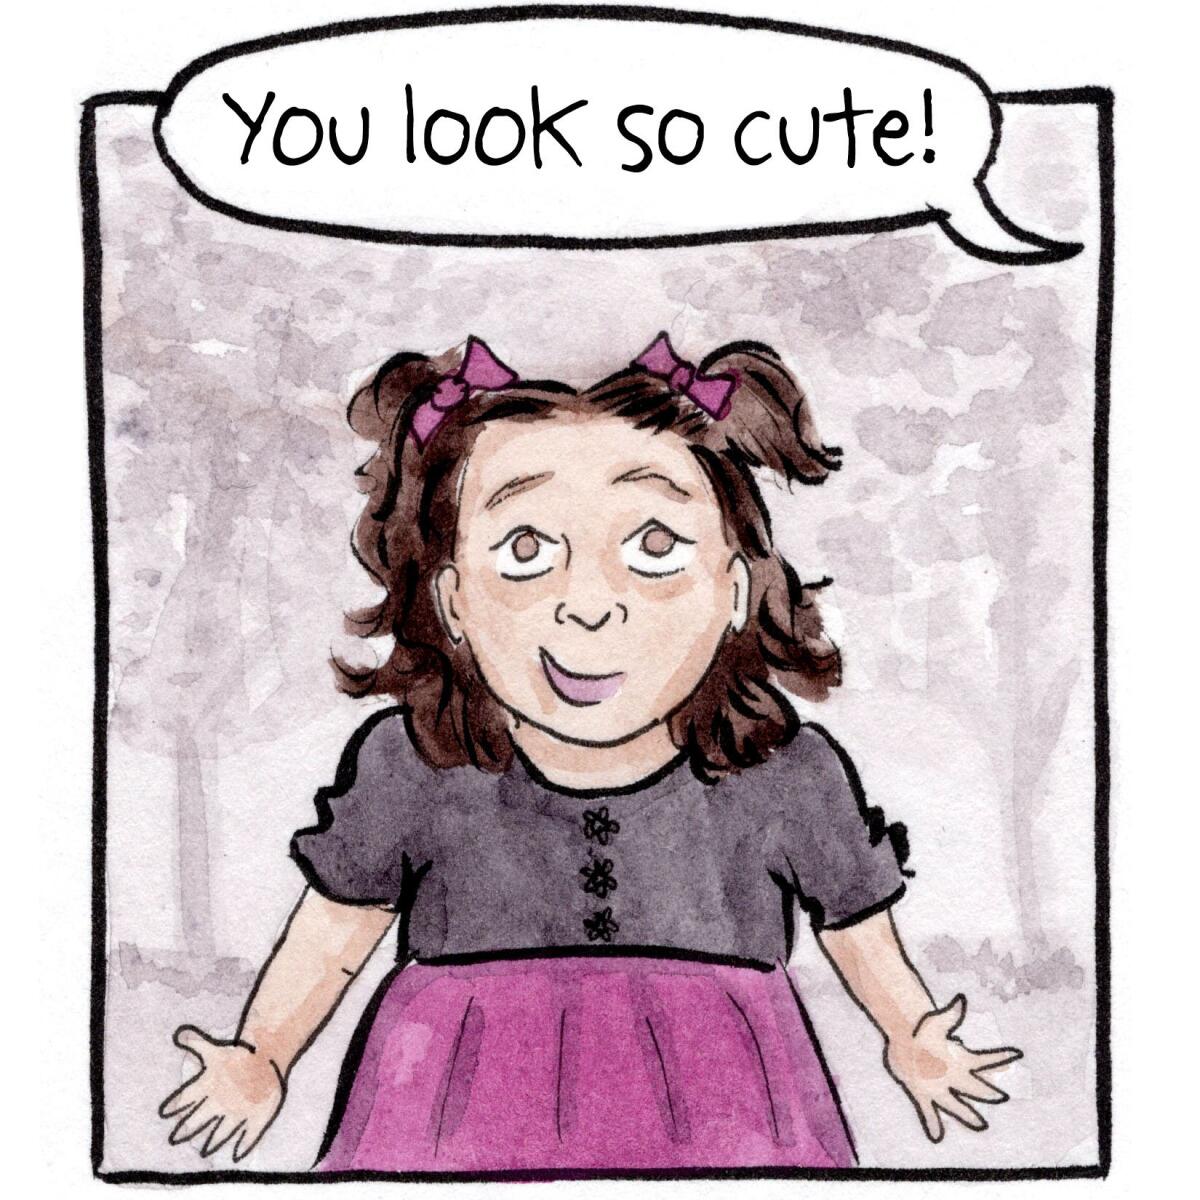 Someone says, "You look so cute!" to a toddler wearing a dress and ribbons in her hair.